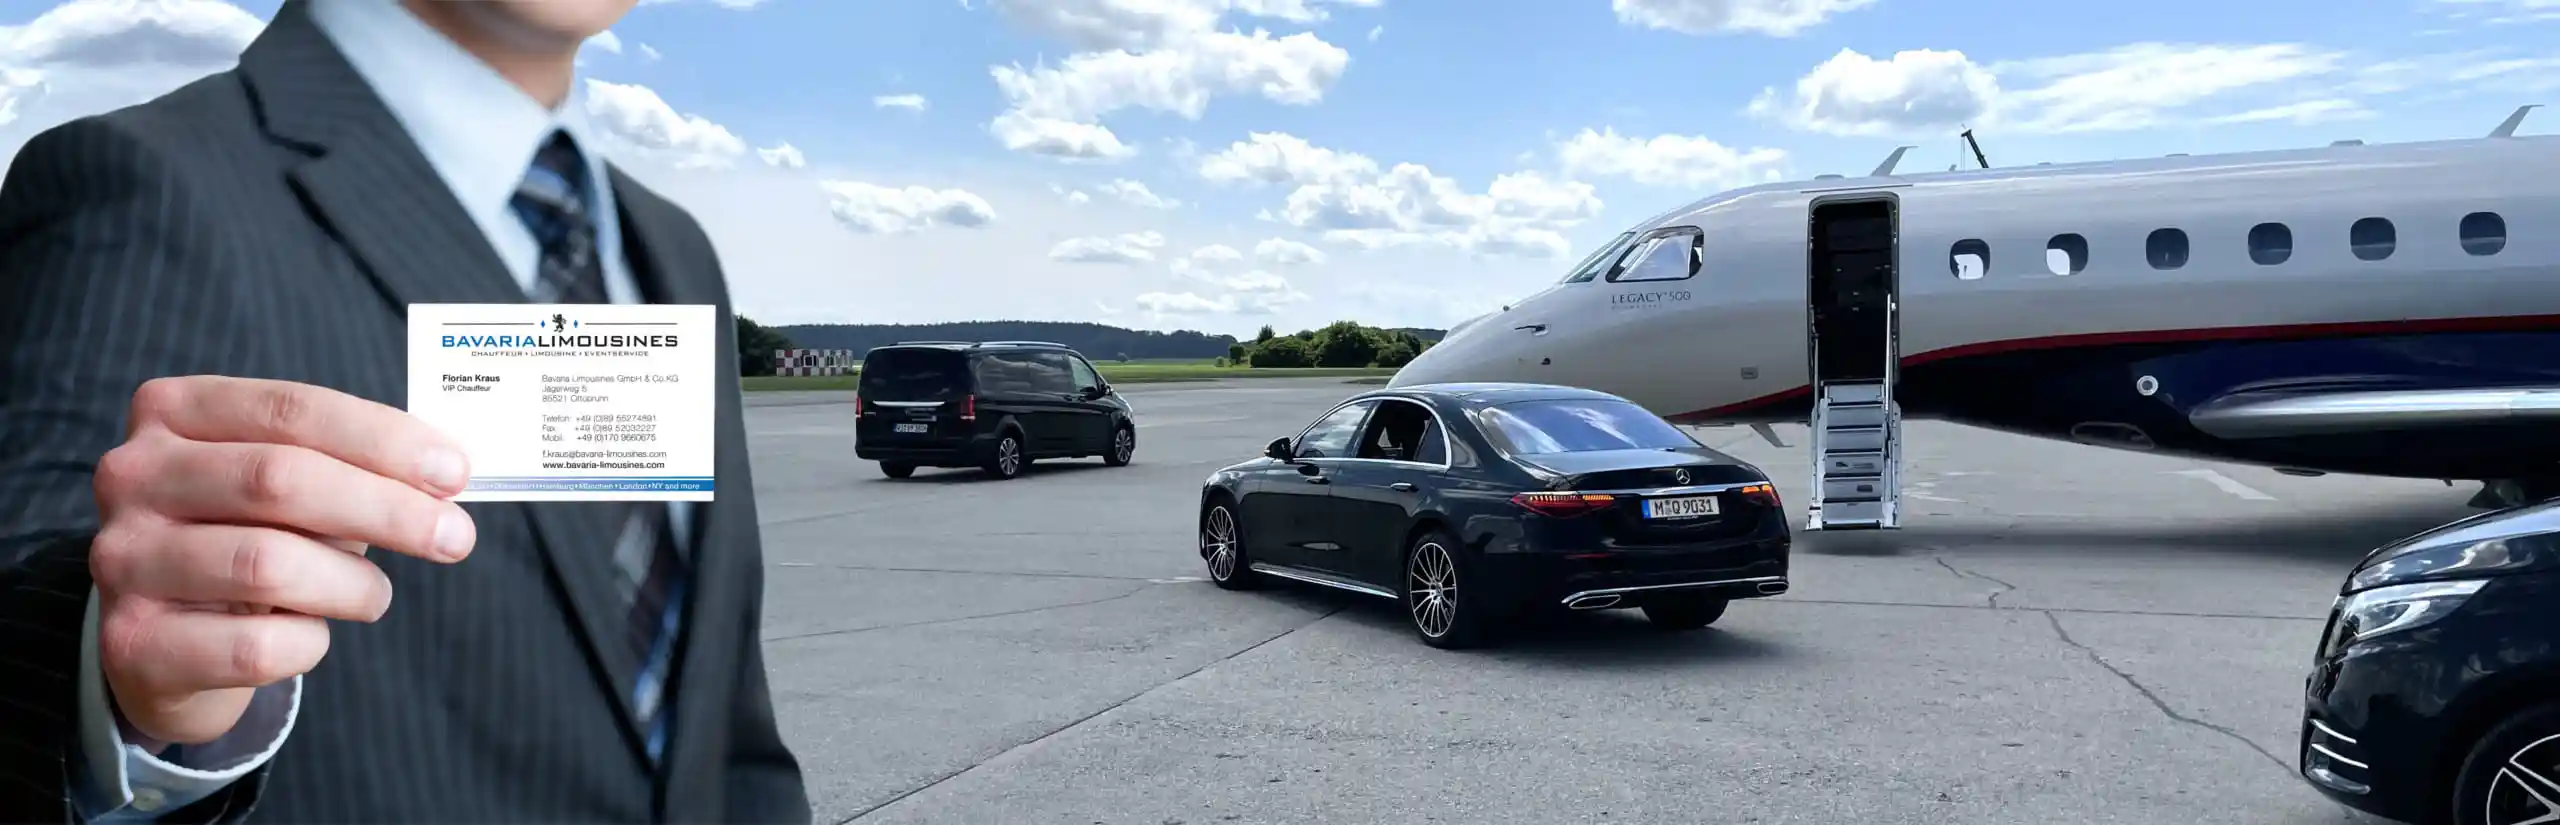 Airport transfer – Munich and Germany